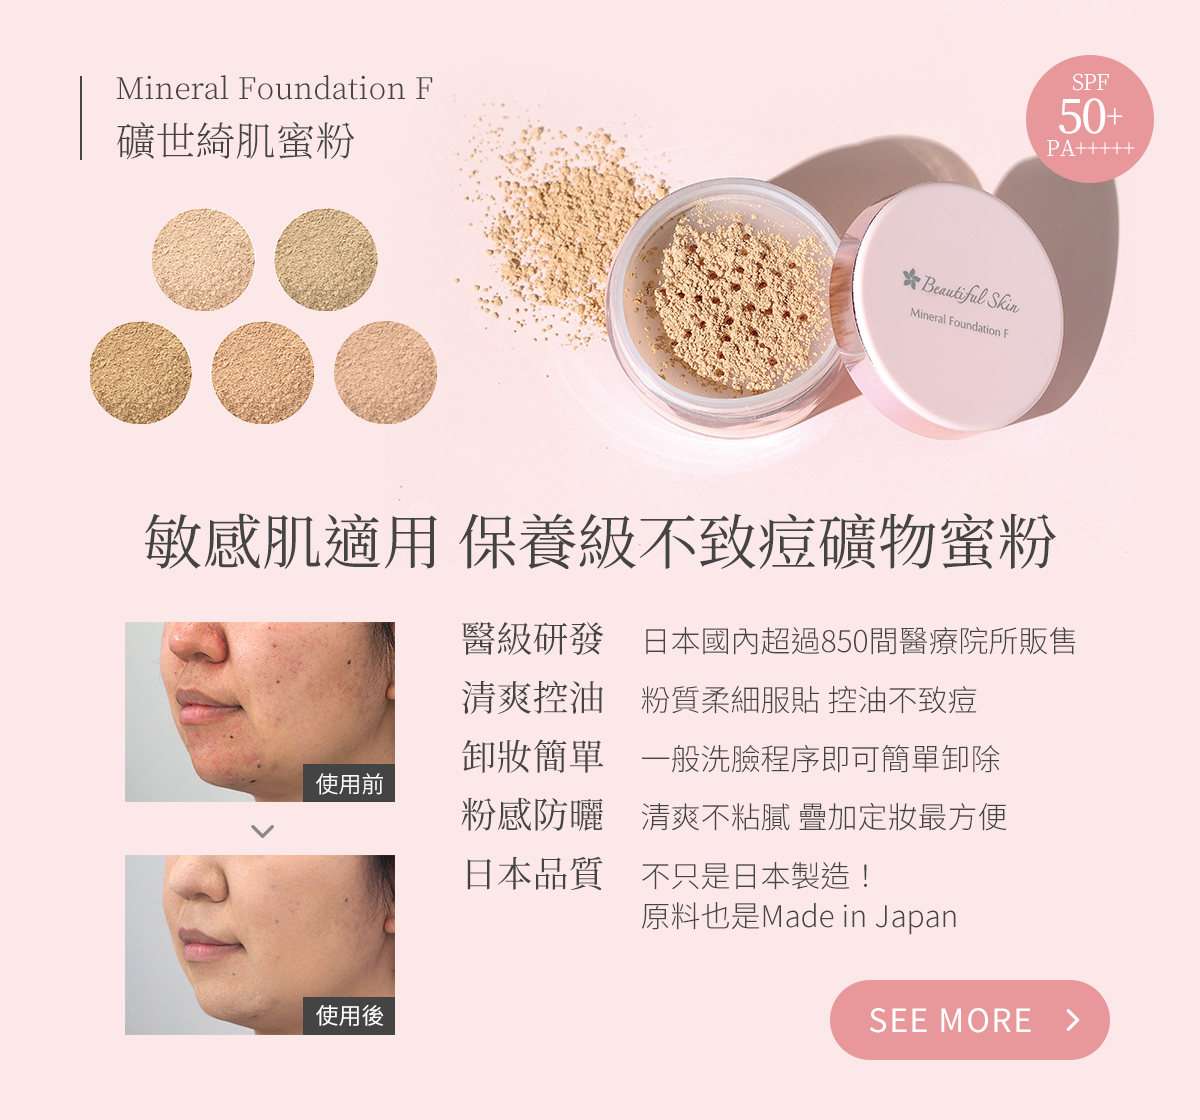 Mineral Foundation F 礦世綺肌蜜粉